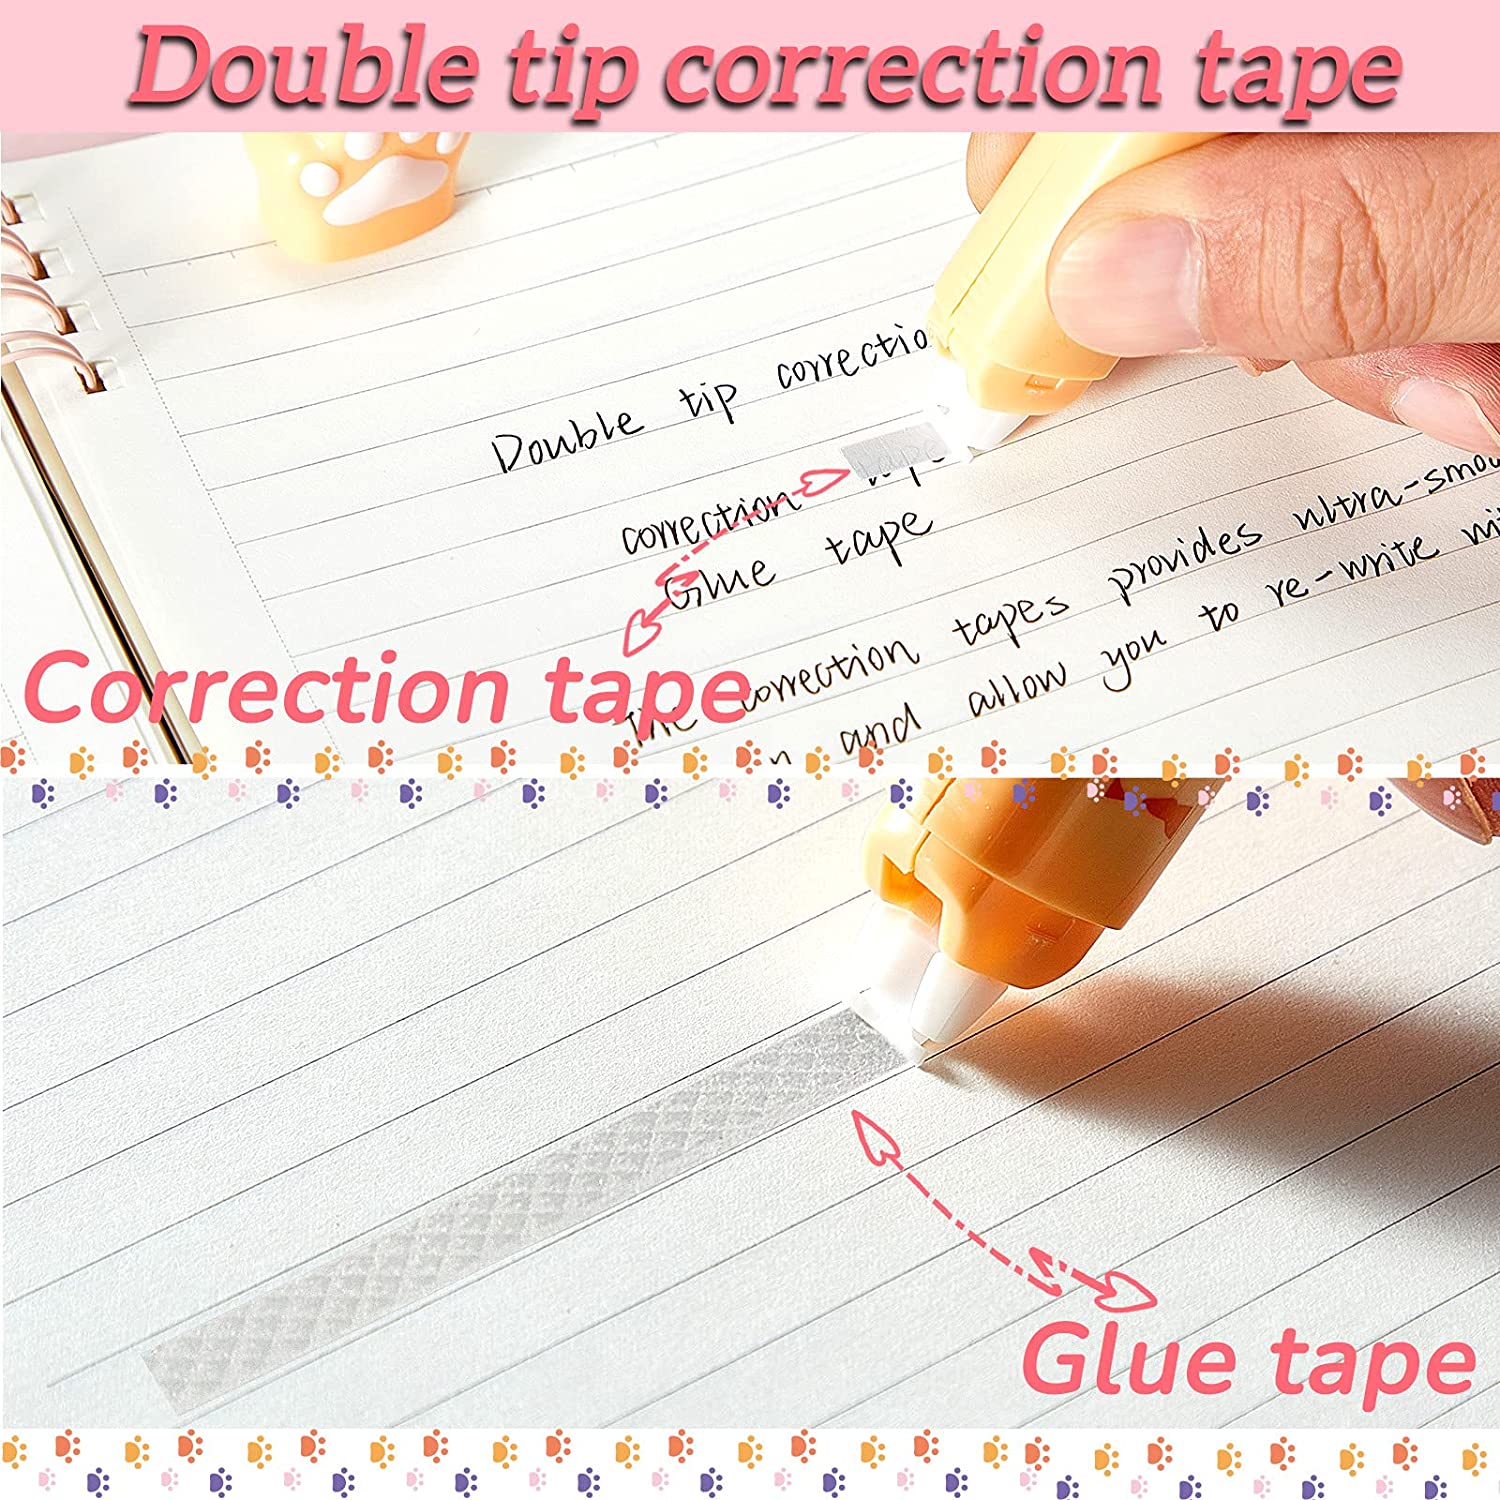 2-in-1 Cat Paw Correction & Glue Tape Roller  Correction tape, Glue tape,  Correction tapes